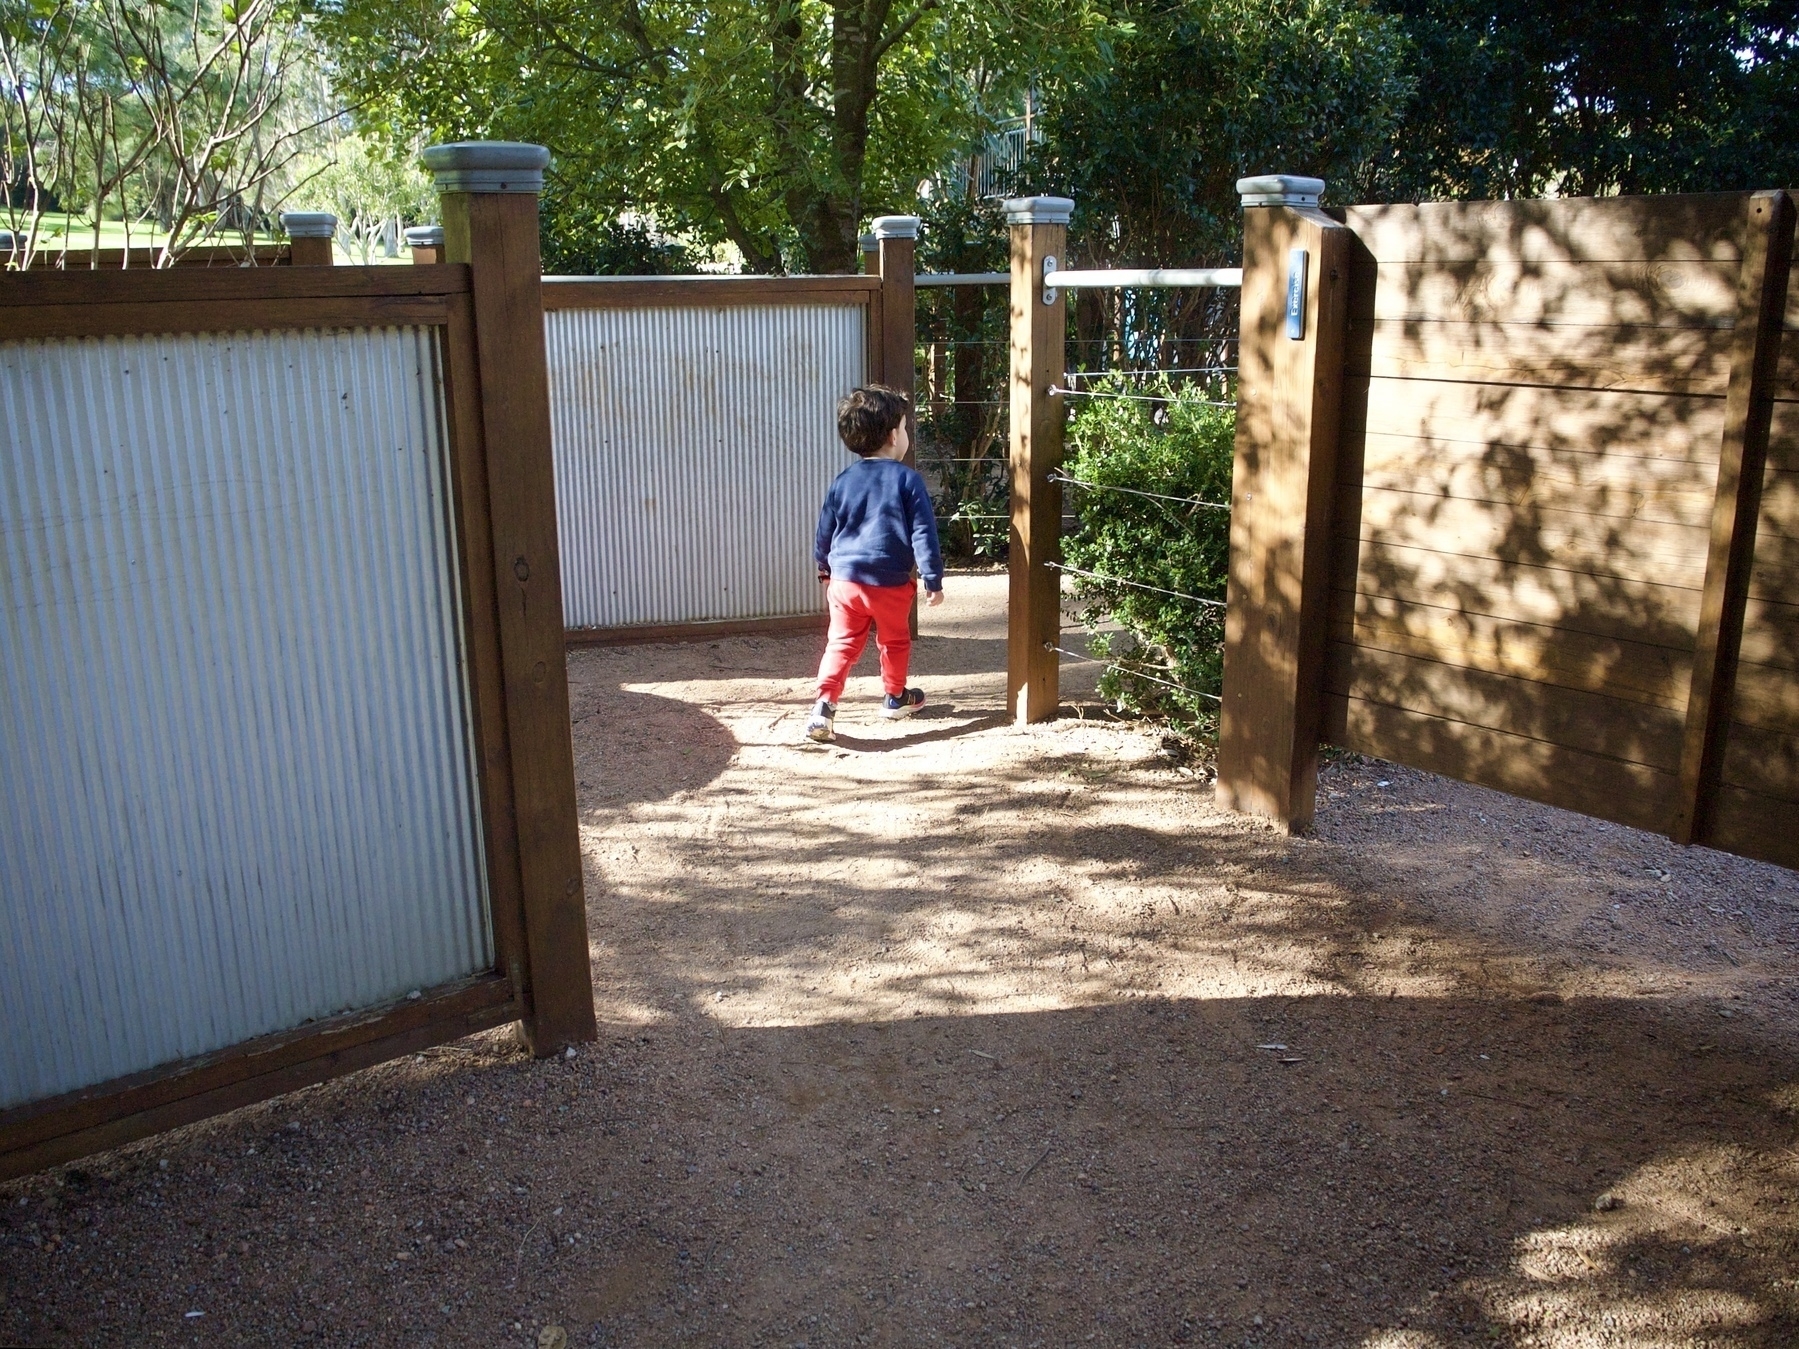 A young boy navigates a garden maze with fences made of wood and steel